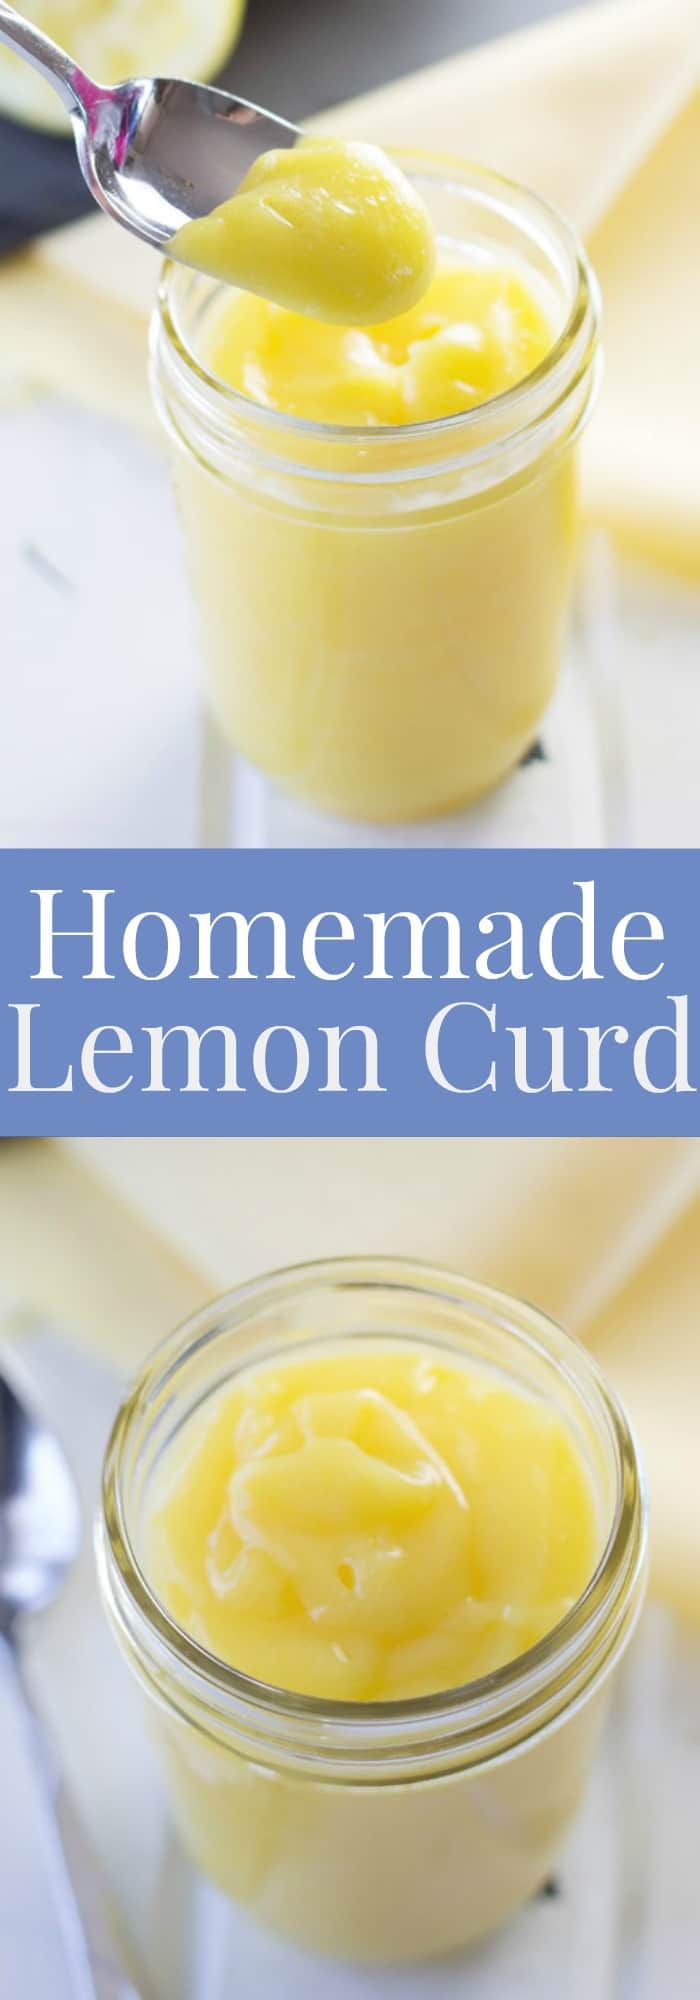 A quick and easy recipe for thick and luscious homemade Lemon Curd! | www.countrysidecravings.com